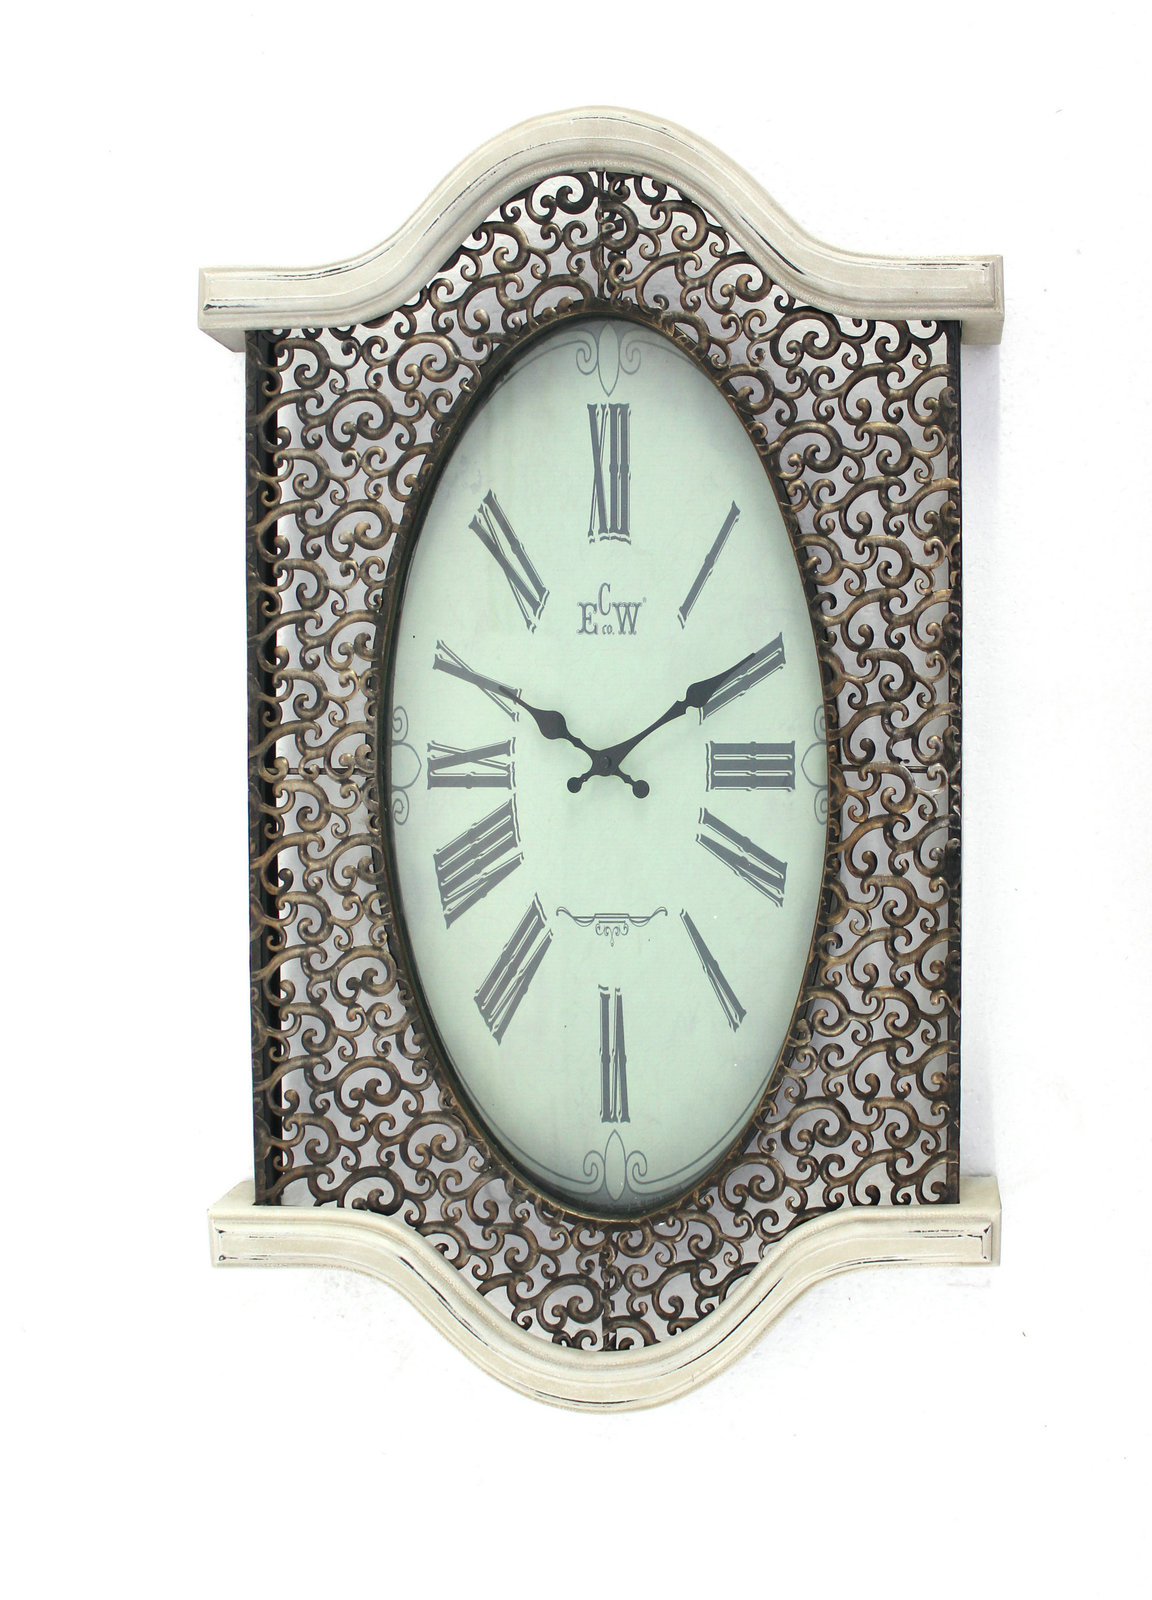 Primary image for 20" Novelty White Glass Analog Wall Clock